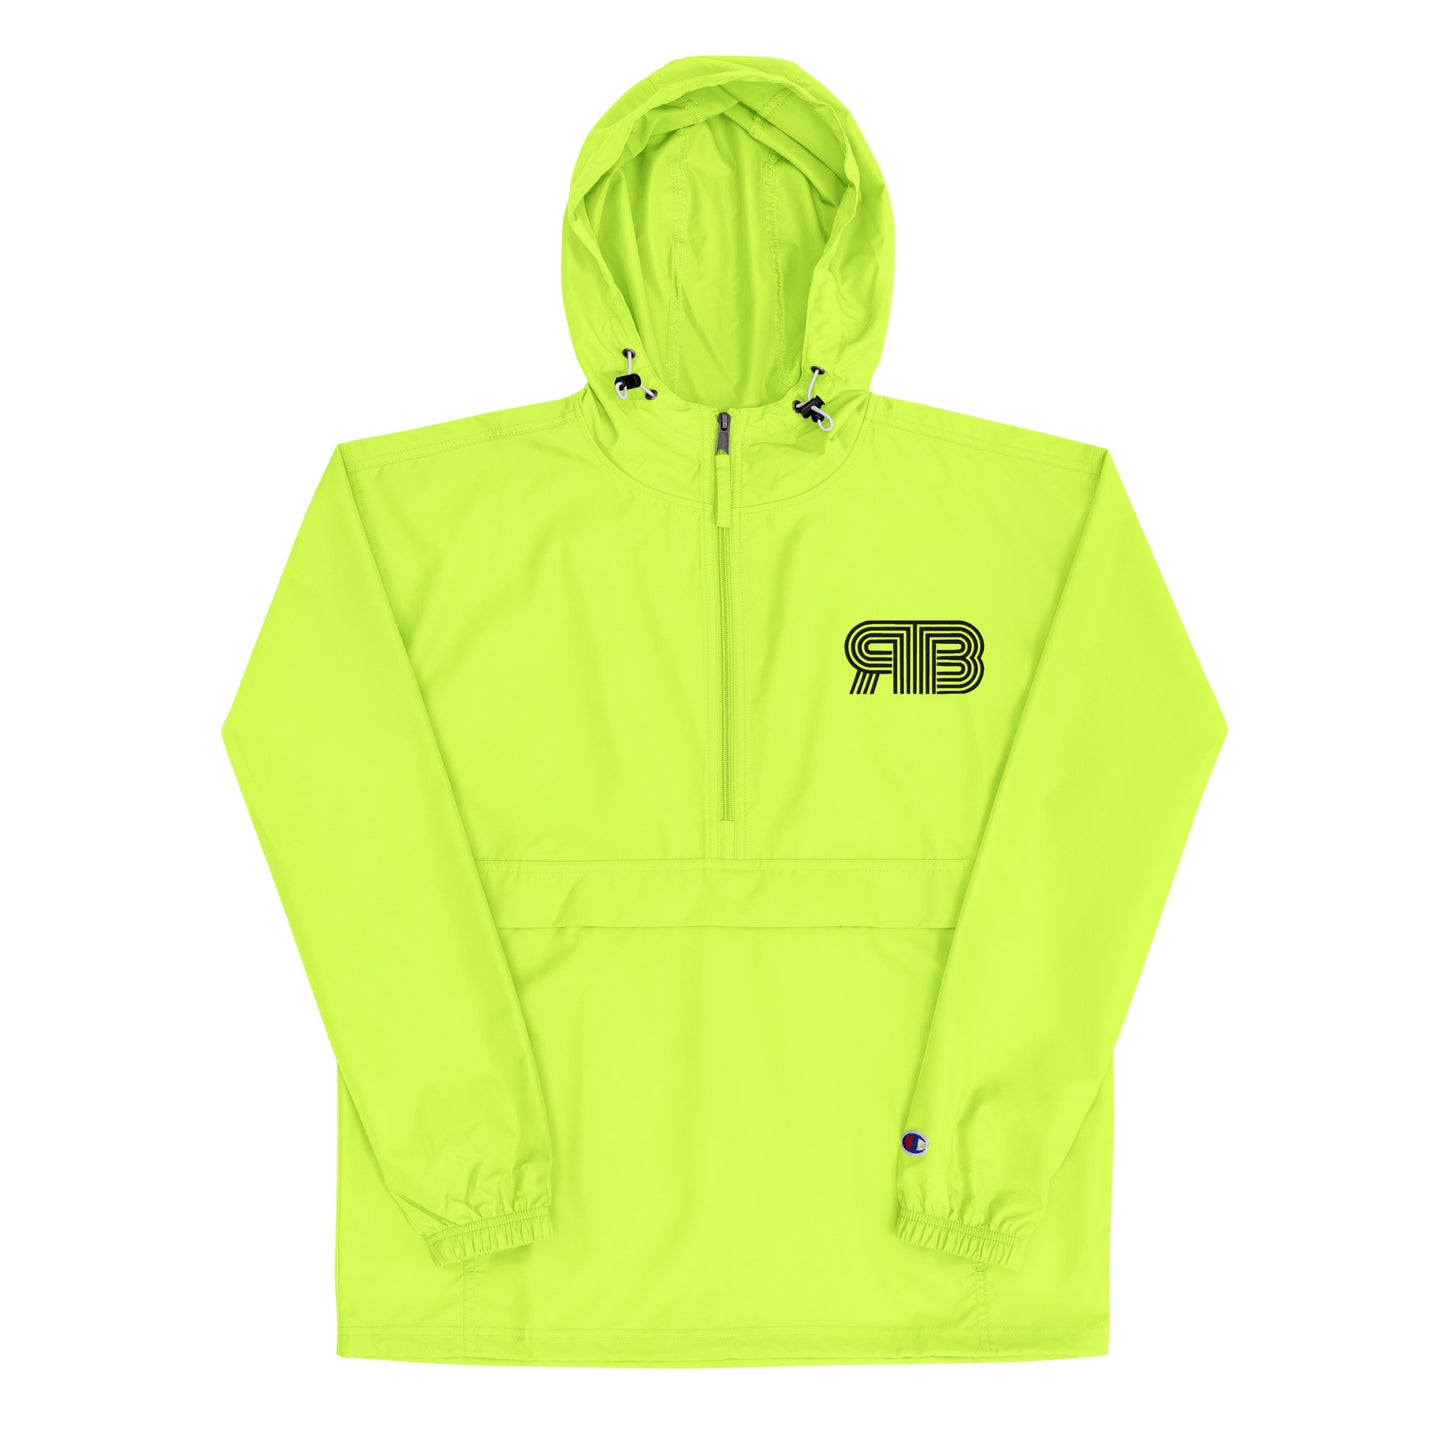 RB Champion Packable Jacket (Safety Green)